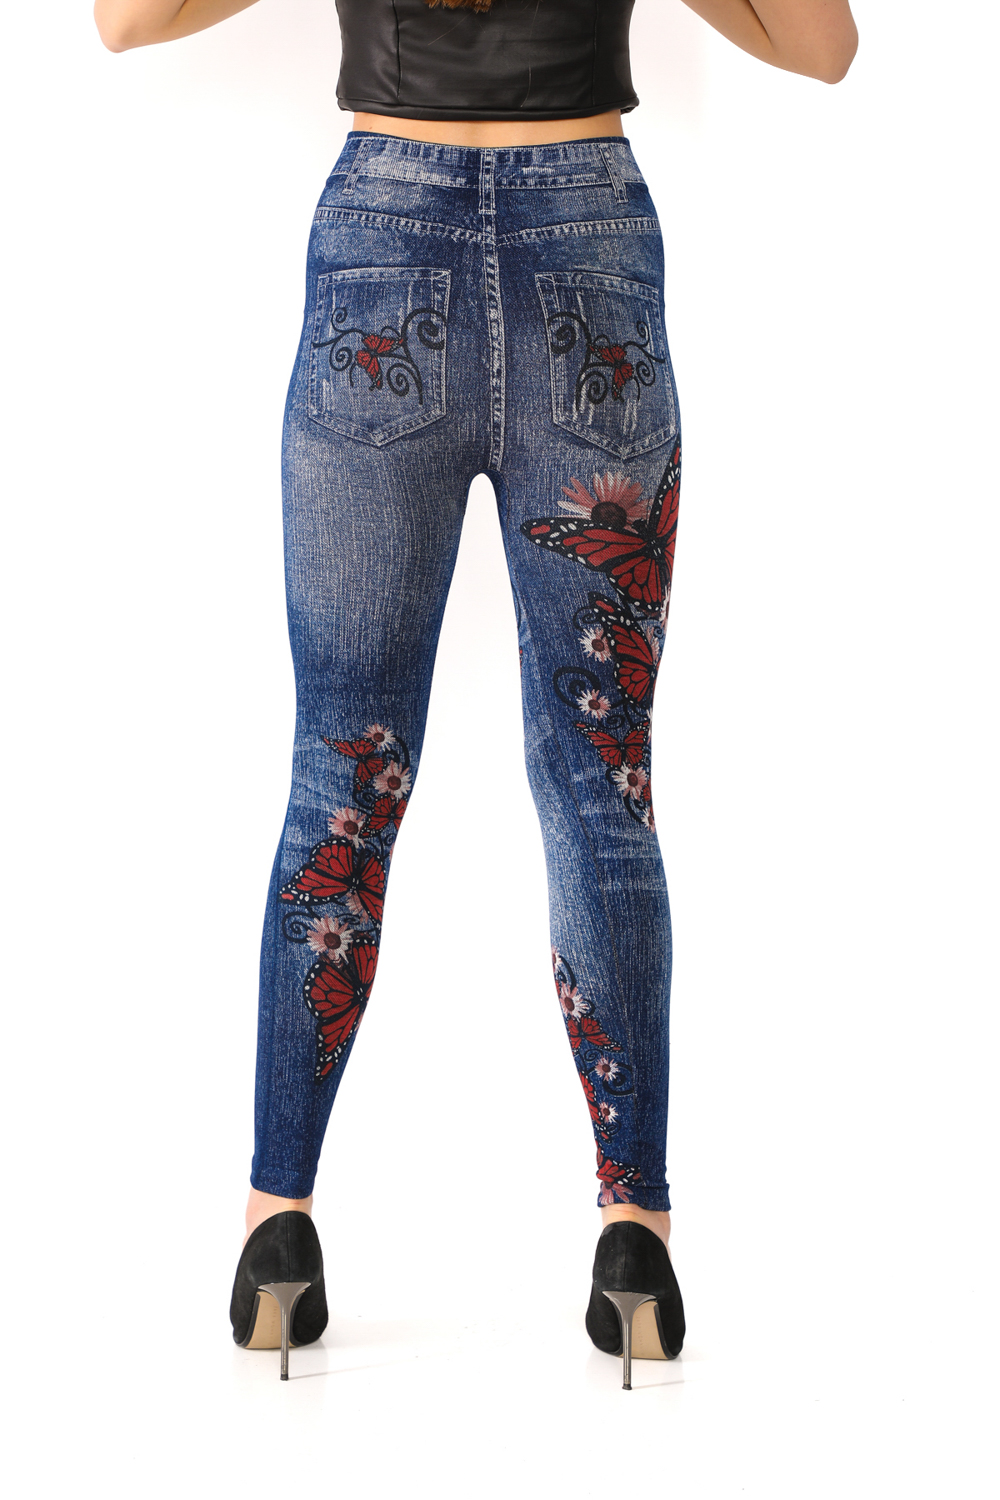 Denim Leggings with Butterflies and Floral Pattern